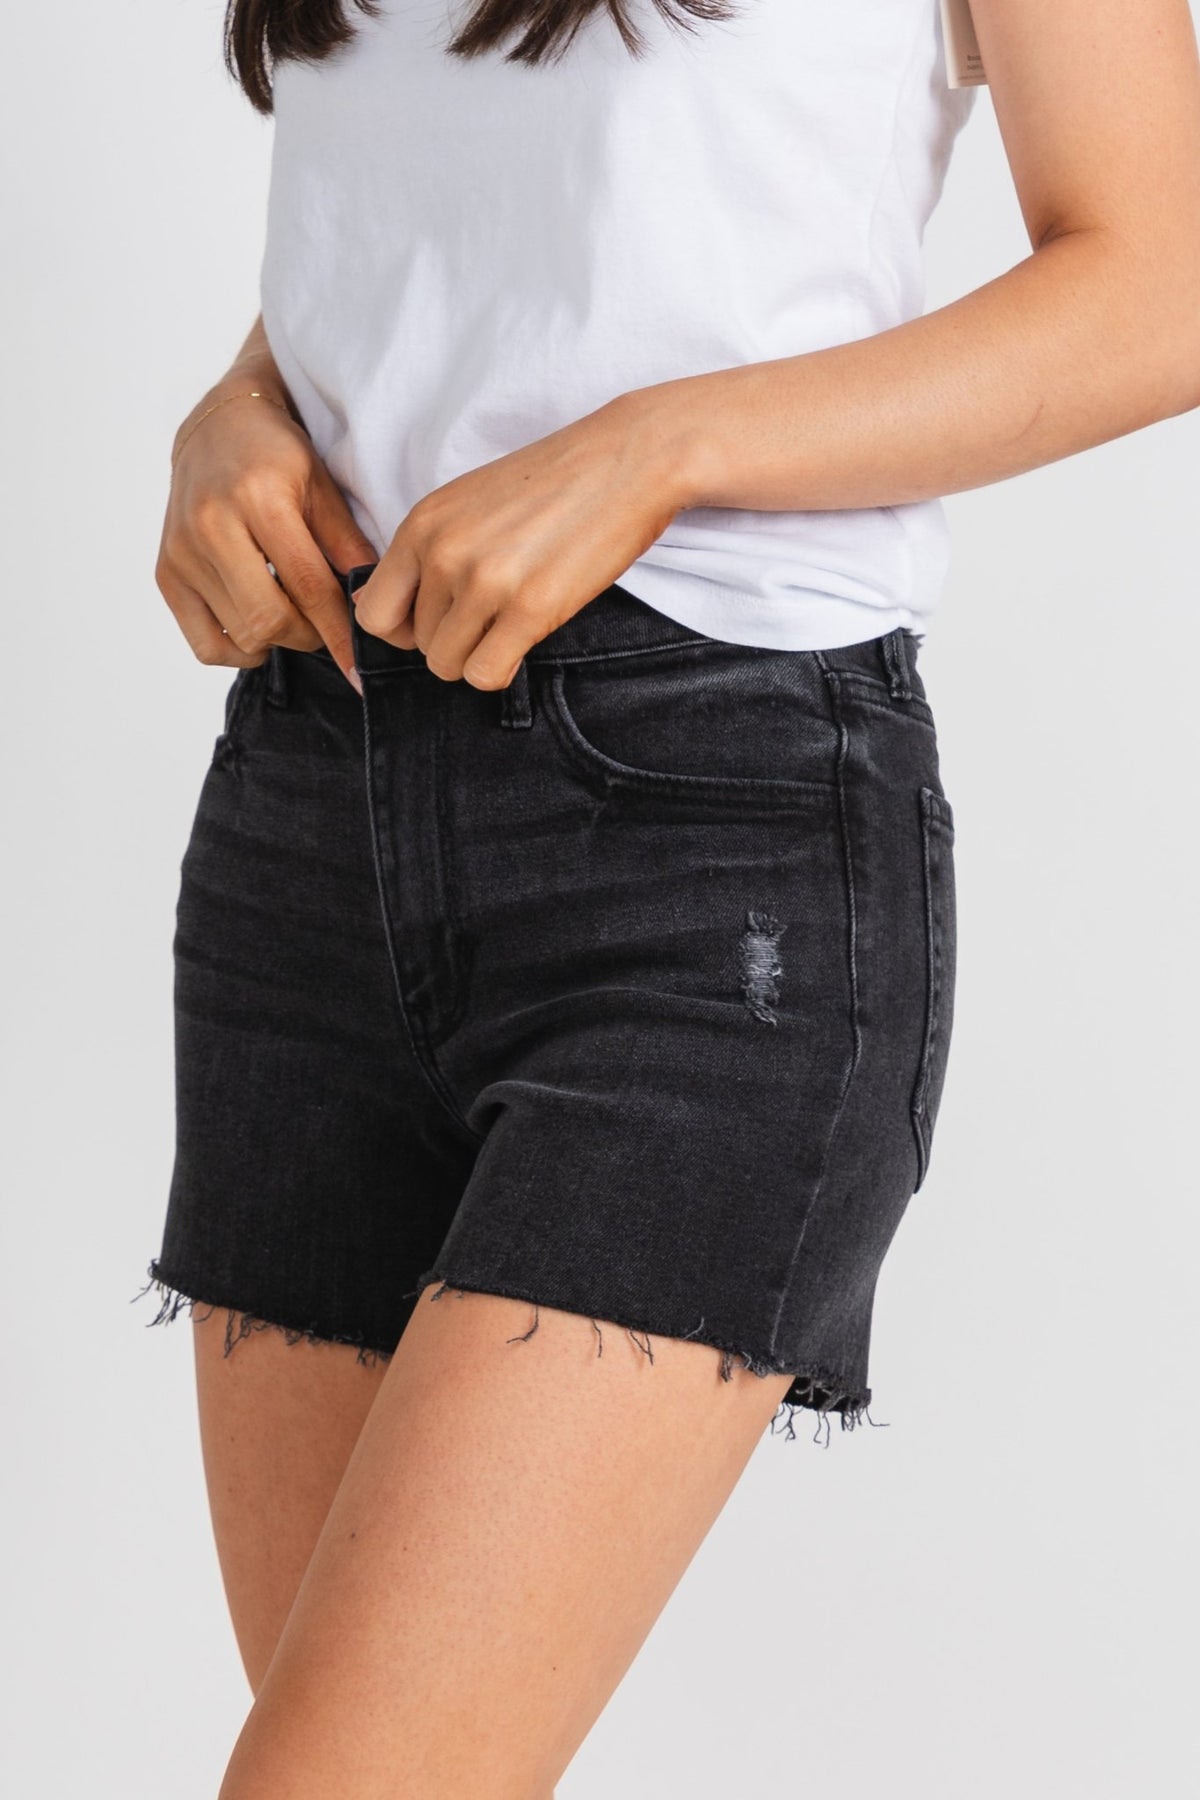 Just USA high rise walking shorts washed black - Trendy shorts - Cute Vacation Collection at Lush Fashion Lounge Boutique in Oklahoma City